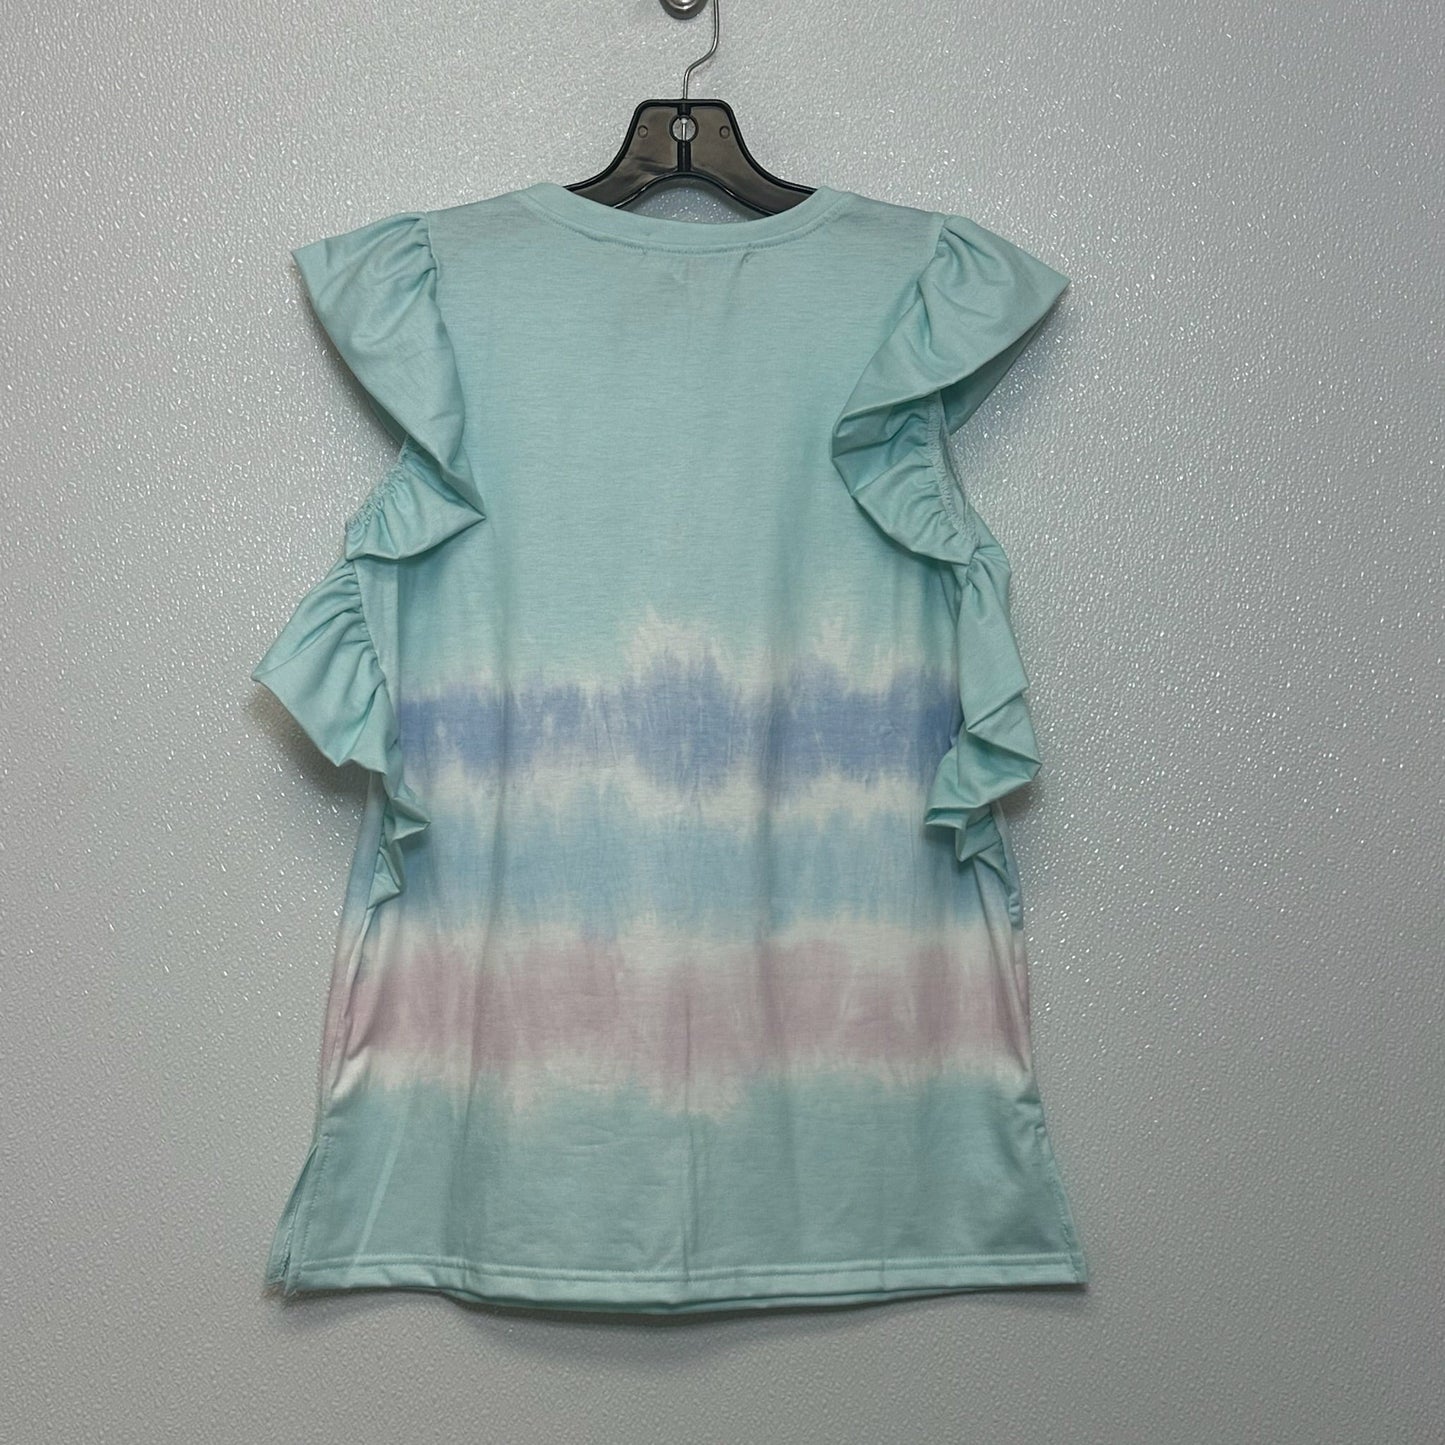 Pastel Top Sleeveless Simply Southern, Size S